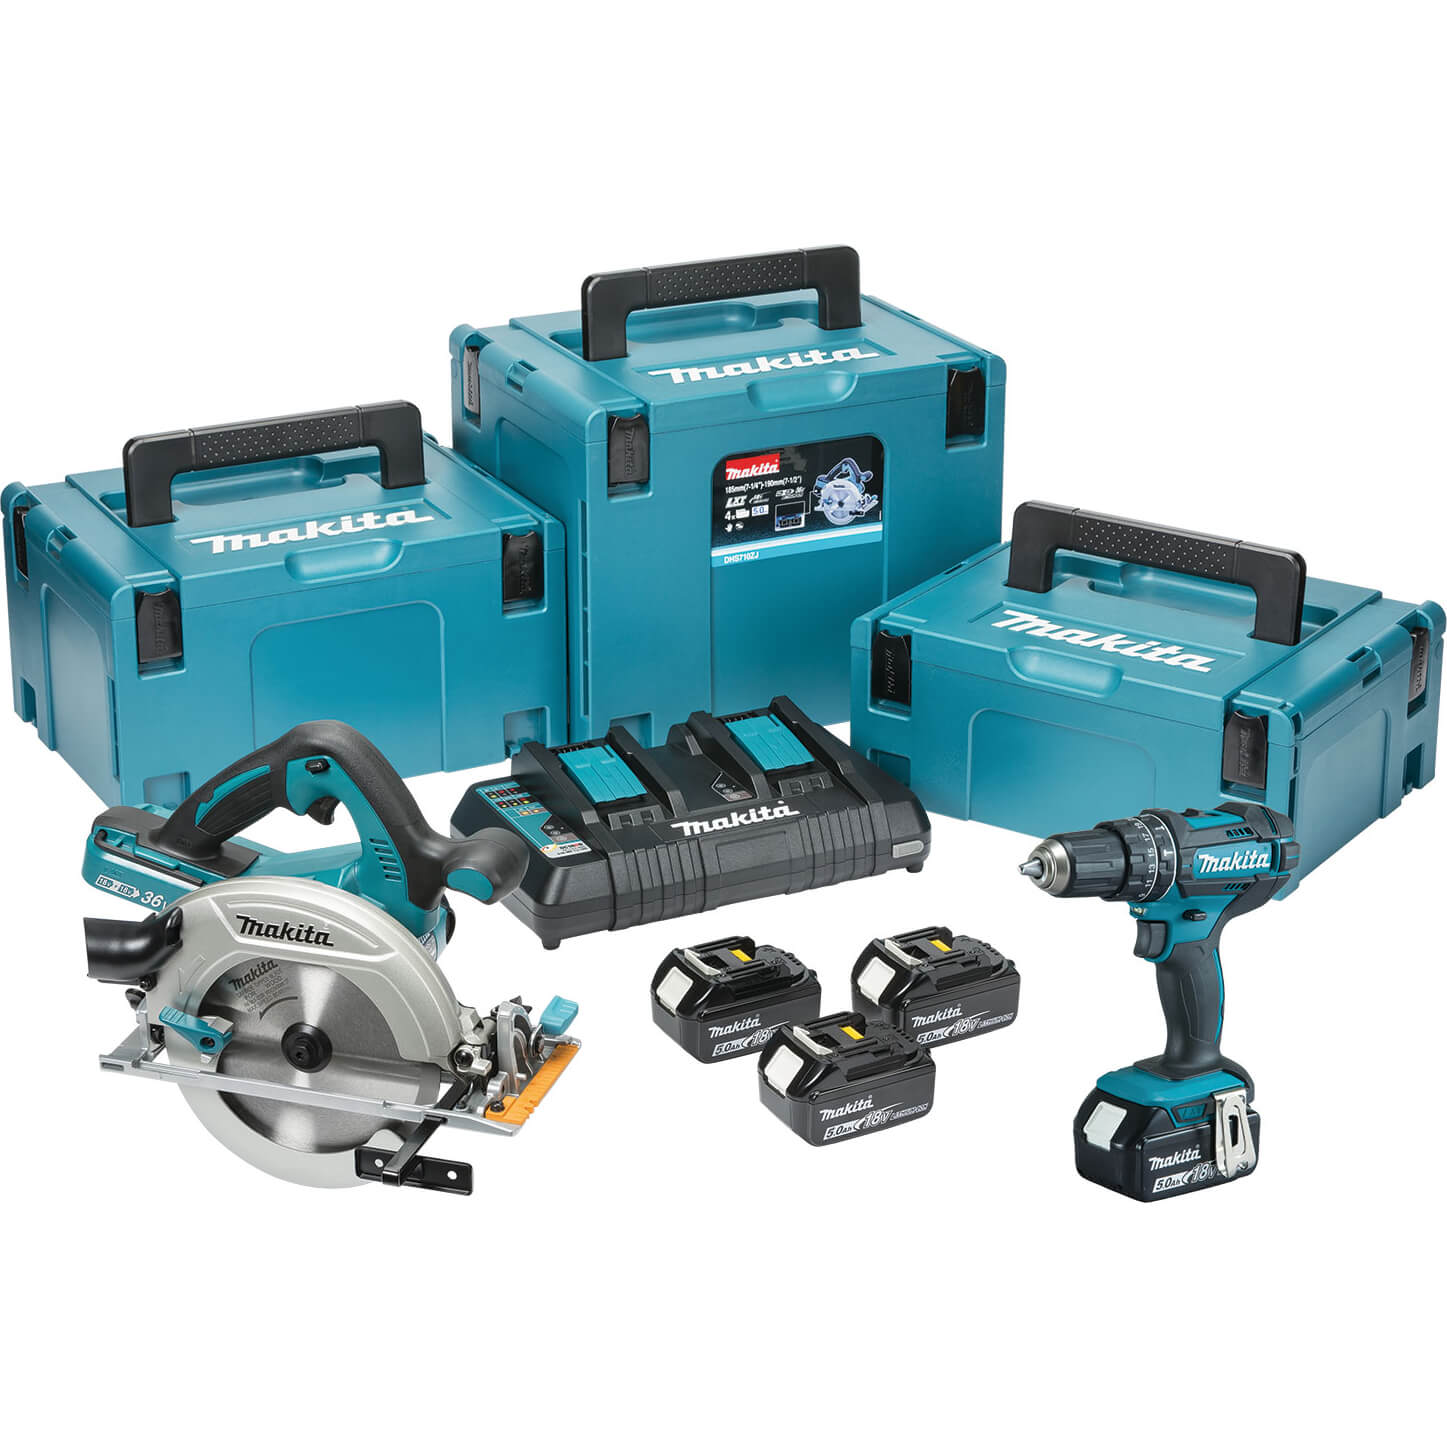 Image of Makita DLX2140PTJ 18v LXT Cordless Circular Saw and Combi Drill Kit 4 x 5ah Li-ion Twin Battery Charger Case